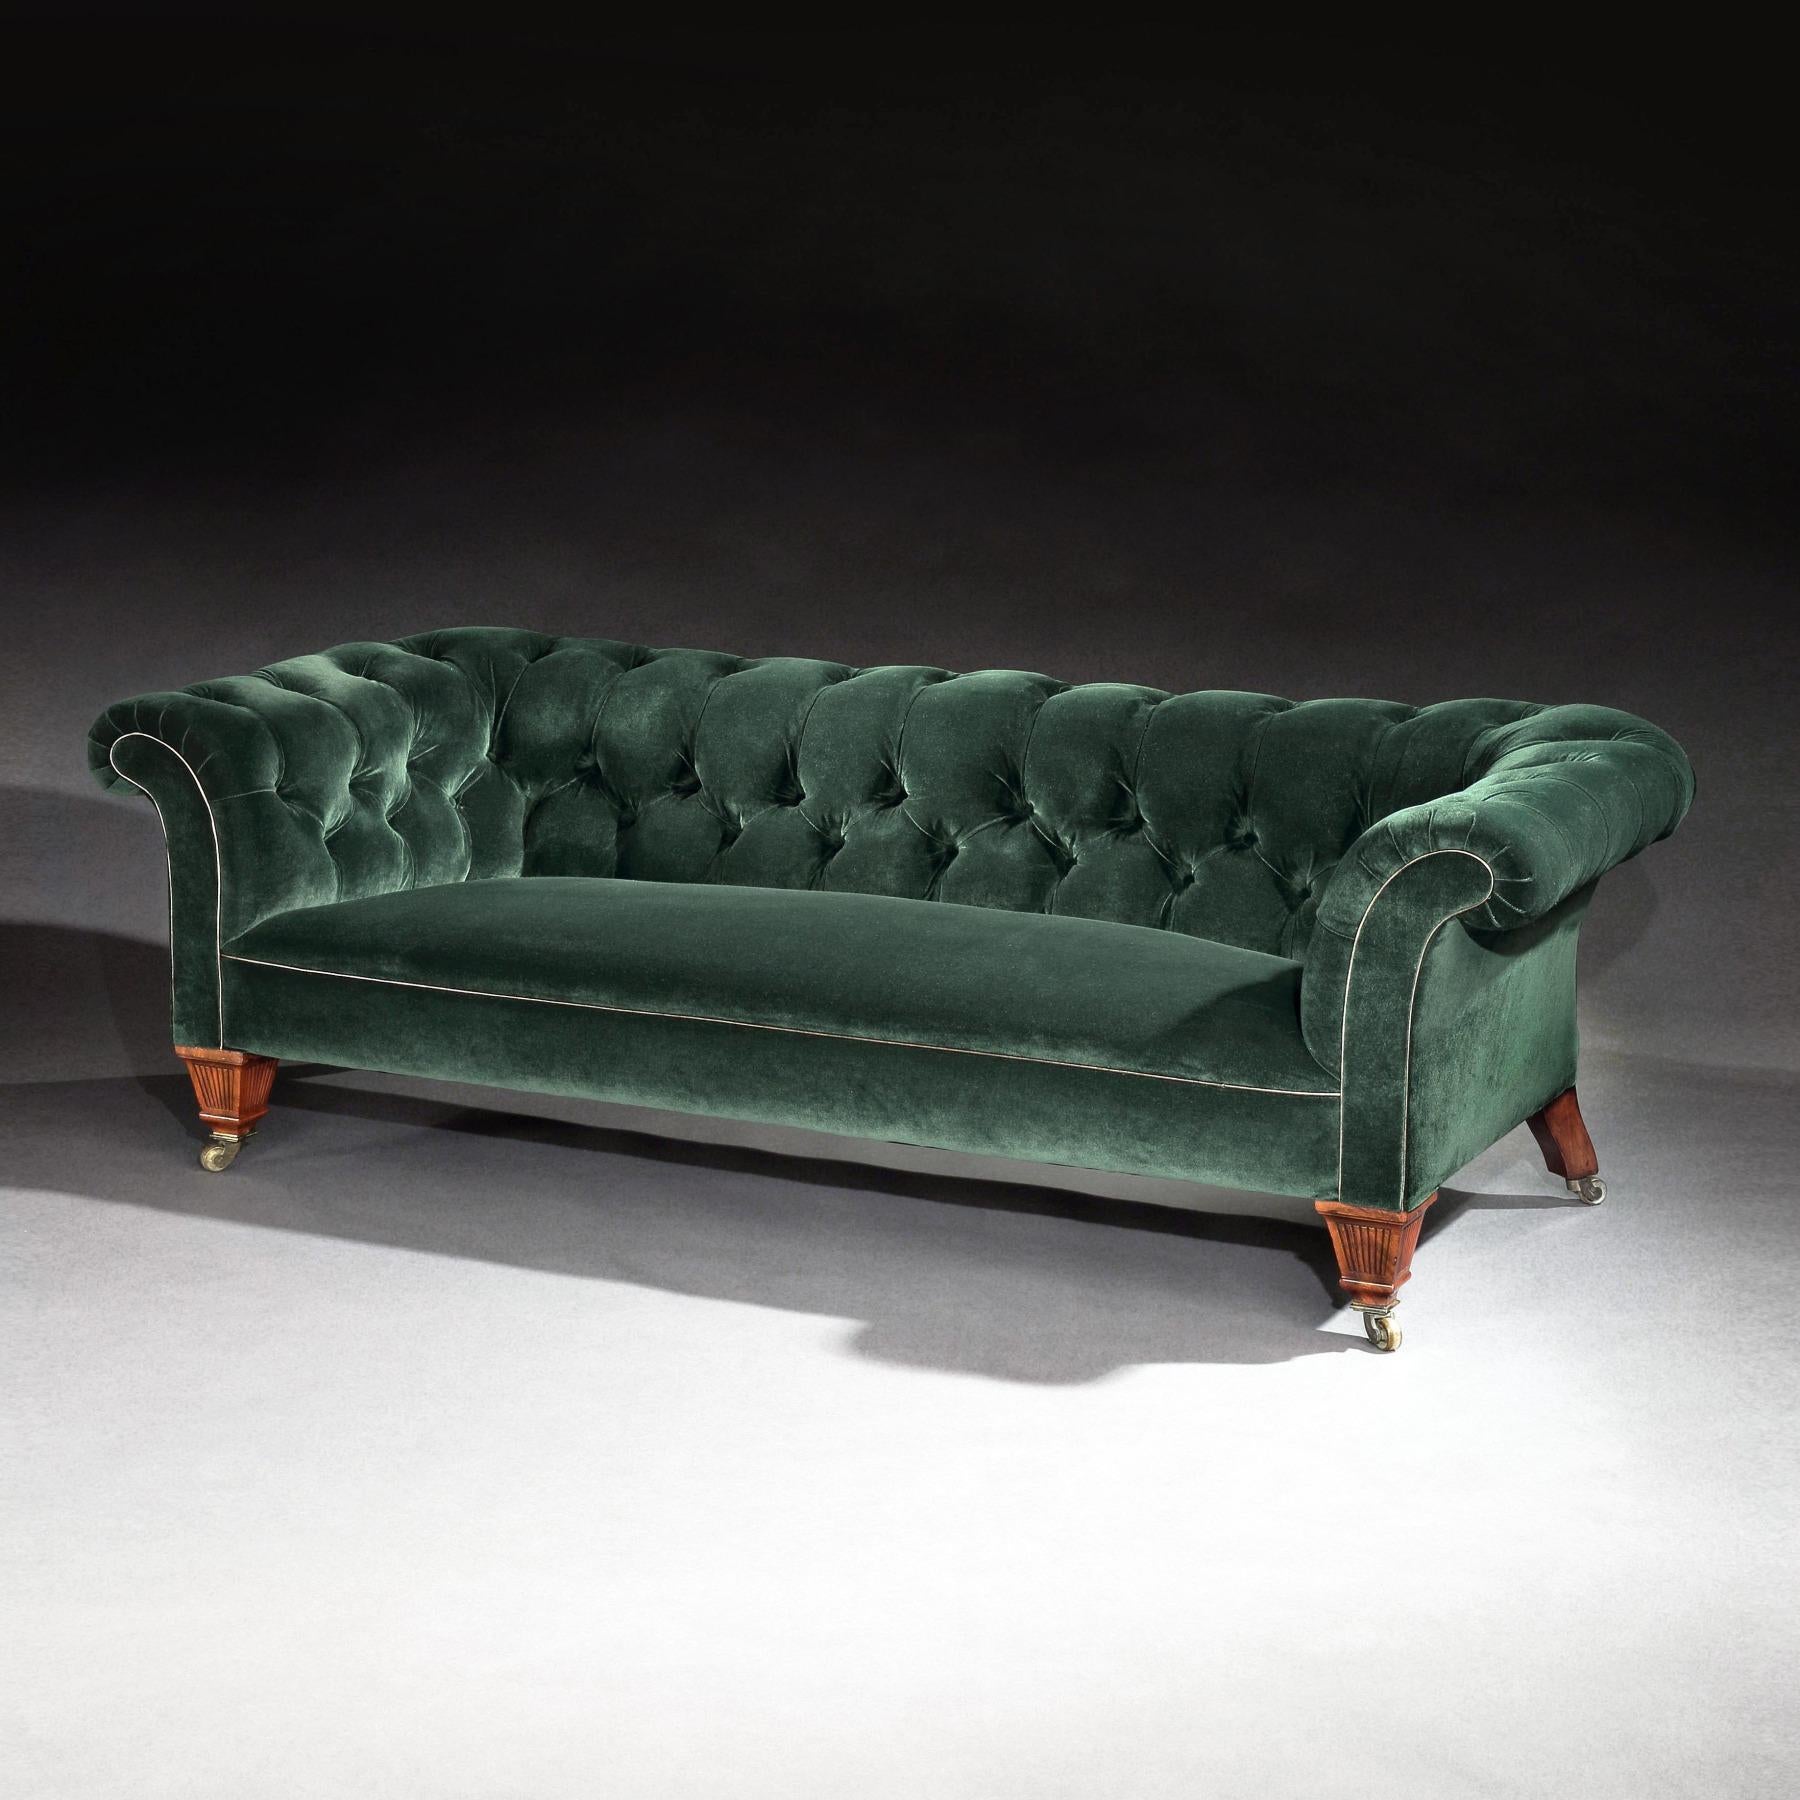 Well proportioned 19th century Victorian Chesterfield sofa having unusual reeded tapering front mahogany legs on the original gilt collars and stamped castors C Hindley and Sons, London.

English, London made circa 1870.

Having out scrolled